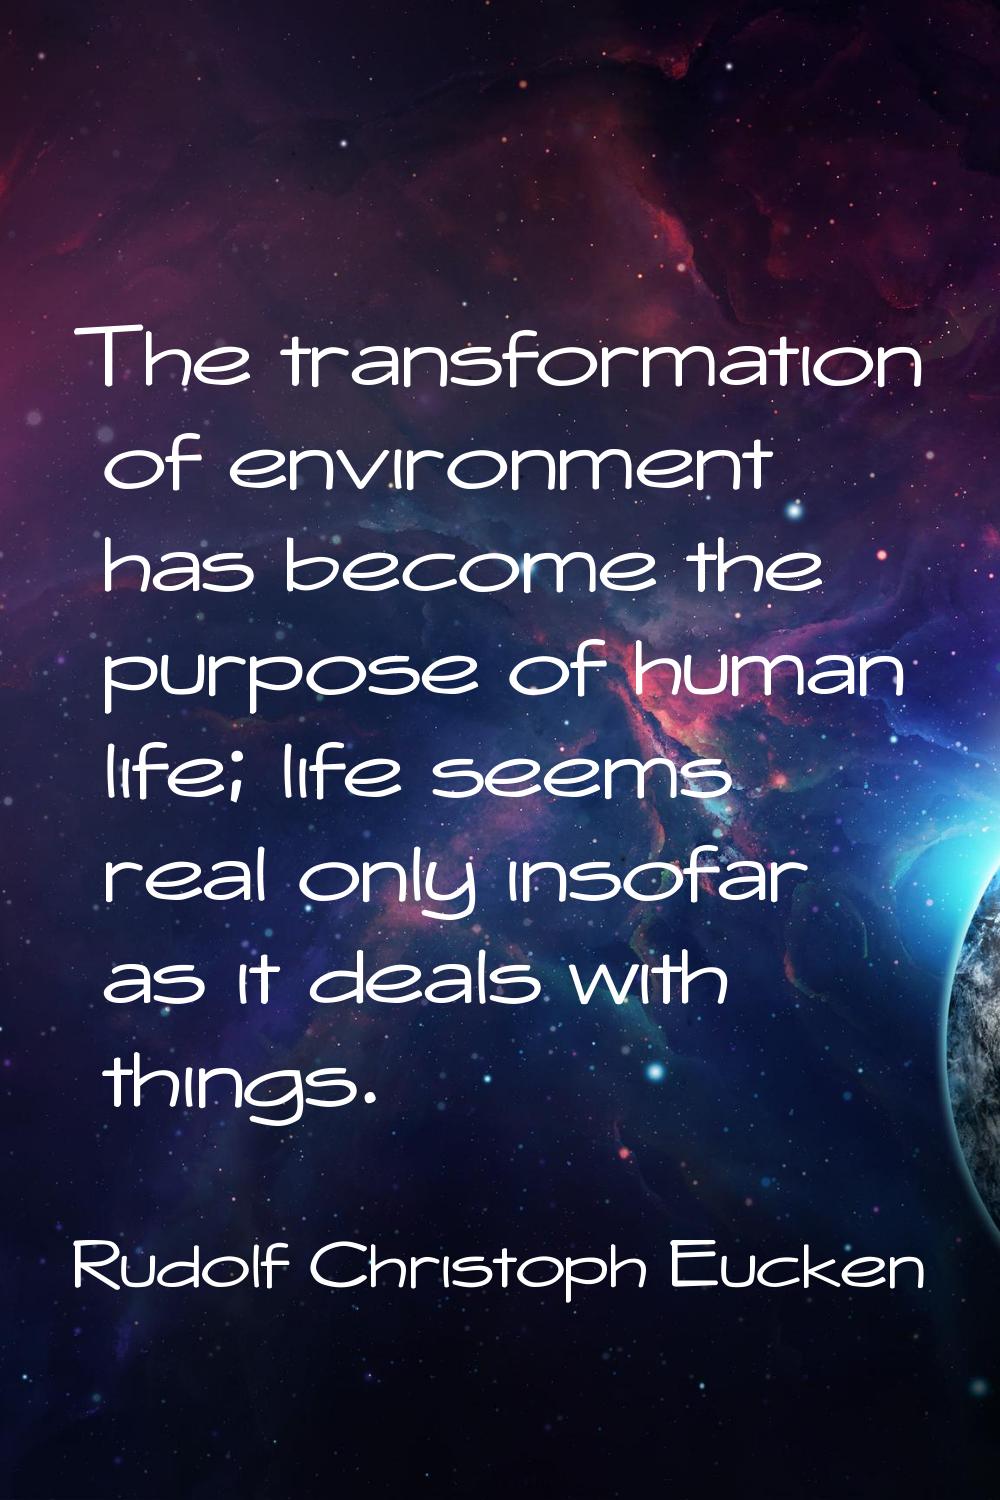 The transformation of environment has become the purpose of human life; life seems real only insofa